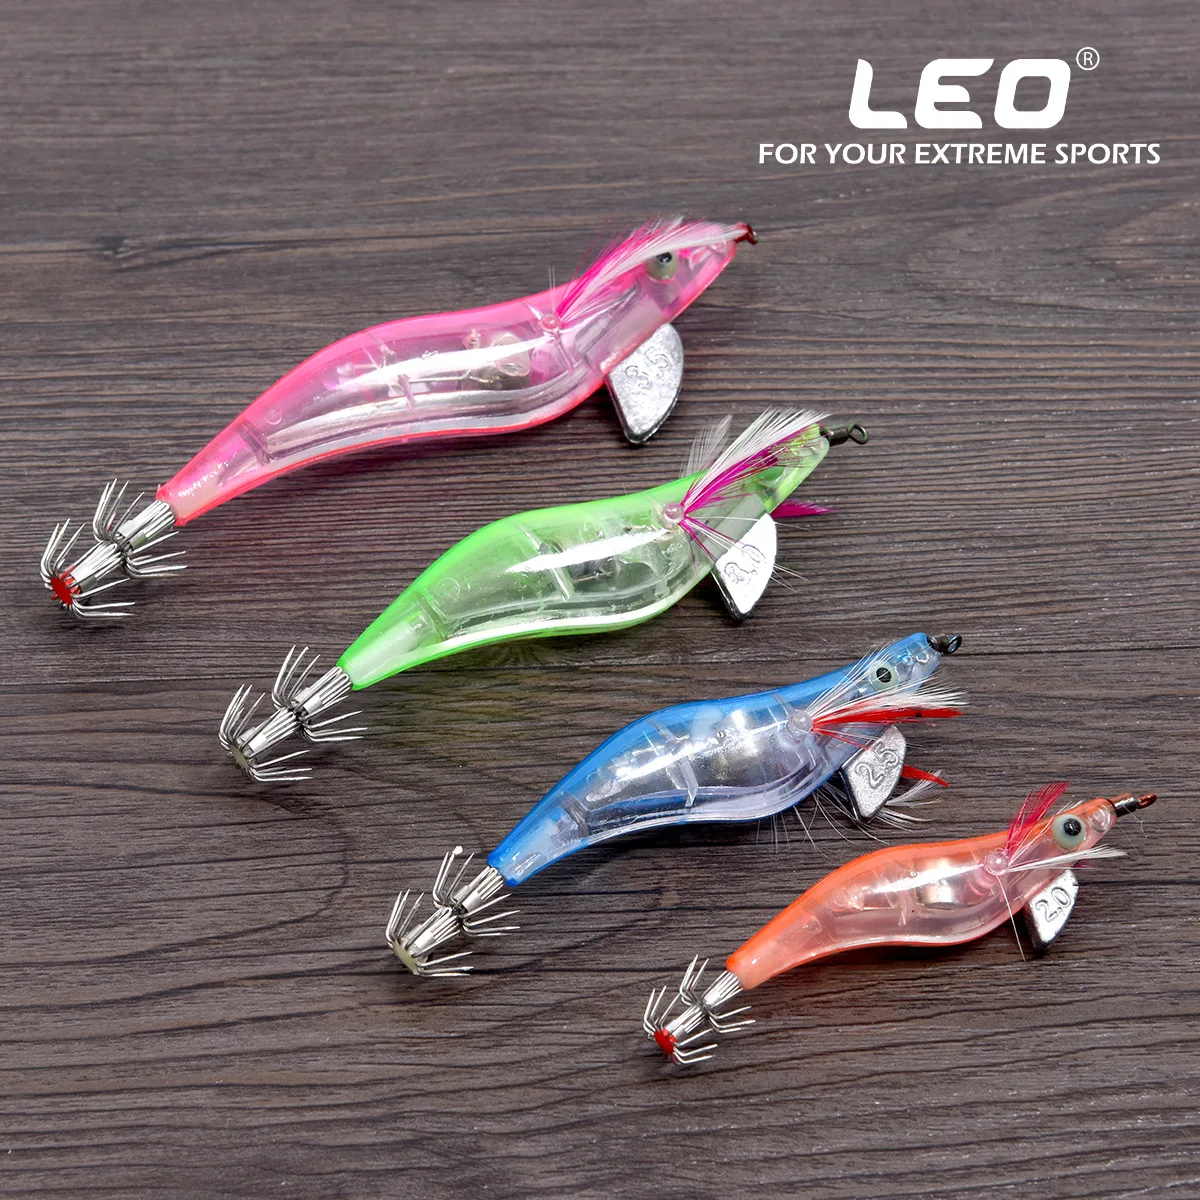 1Pcs 2.5#3.0#3.5# Luminous In Water Fishing Lure Wood Shrimp Squid Hook Jigs Artificial Baits Squid Lure Built-in Button Battery